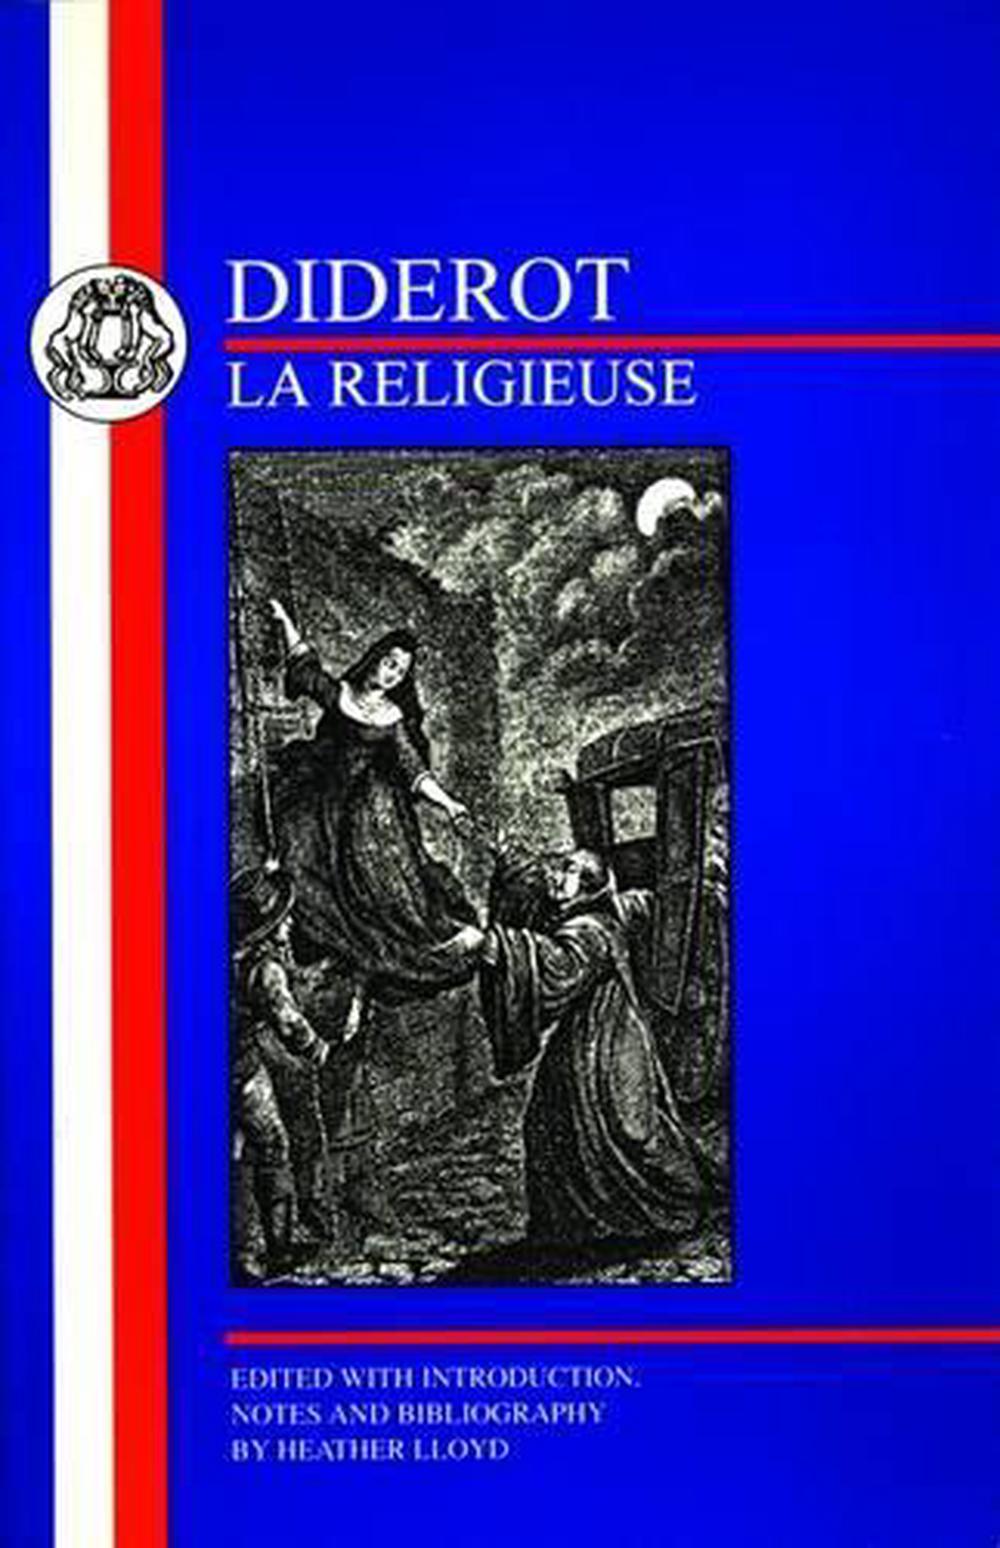 Diderot: La Religieuse by Denis Diderot (English) Paperback Book Free ...